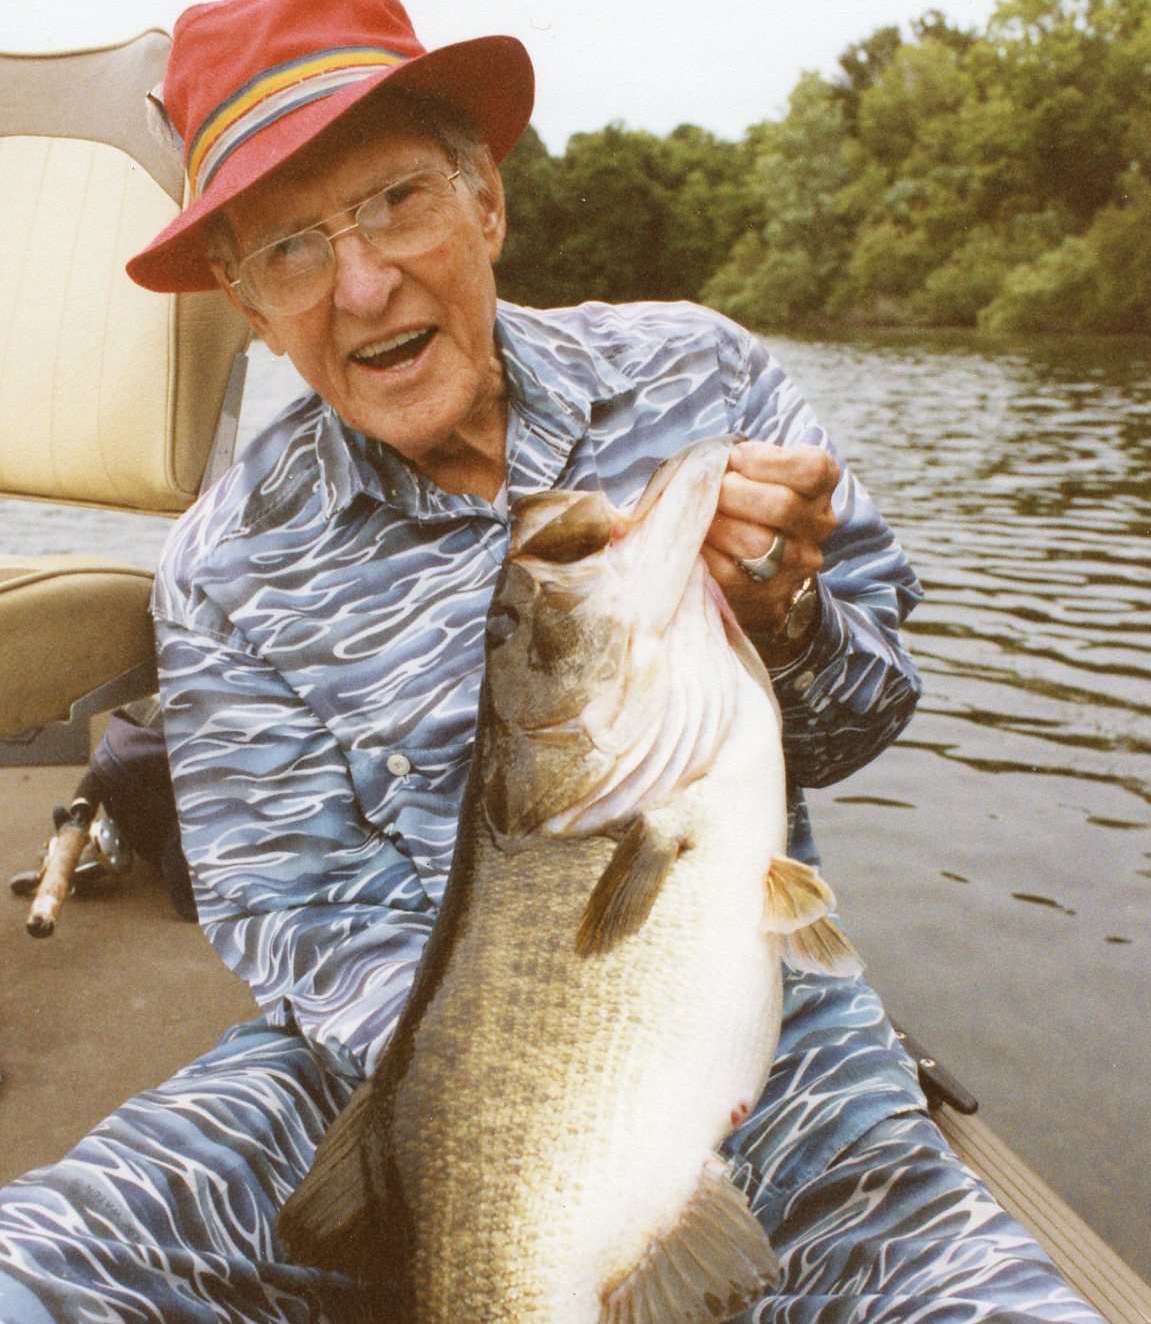 <h4>
Homer Circle</h4><BR>
Circle was perhaps best known to many as the long-time fishing editor for Sports Afield magazine, serving in that role from 1968 through 2002. He was the author of numerous books on bass fishing, and a host of television fishing programs, such as âThe Fisherman,â âSports Afieldâ and âThe Outdoorsman.â He starred in two fishing films, Bigmouth in 1973 and Bigmouth Forever in 1996. Circleâs monthly column in Bassmaster, âAsk Uncle Homer,â was one of the most popular in the magazine. He remained active in writingâand fishingâuntil his death in 2012 at the age of 97. 
